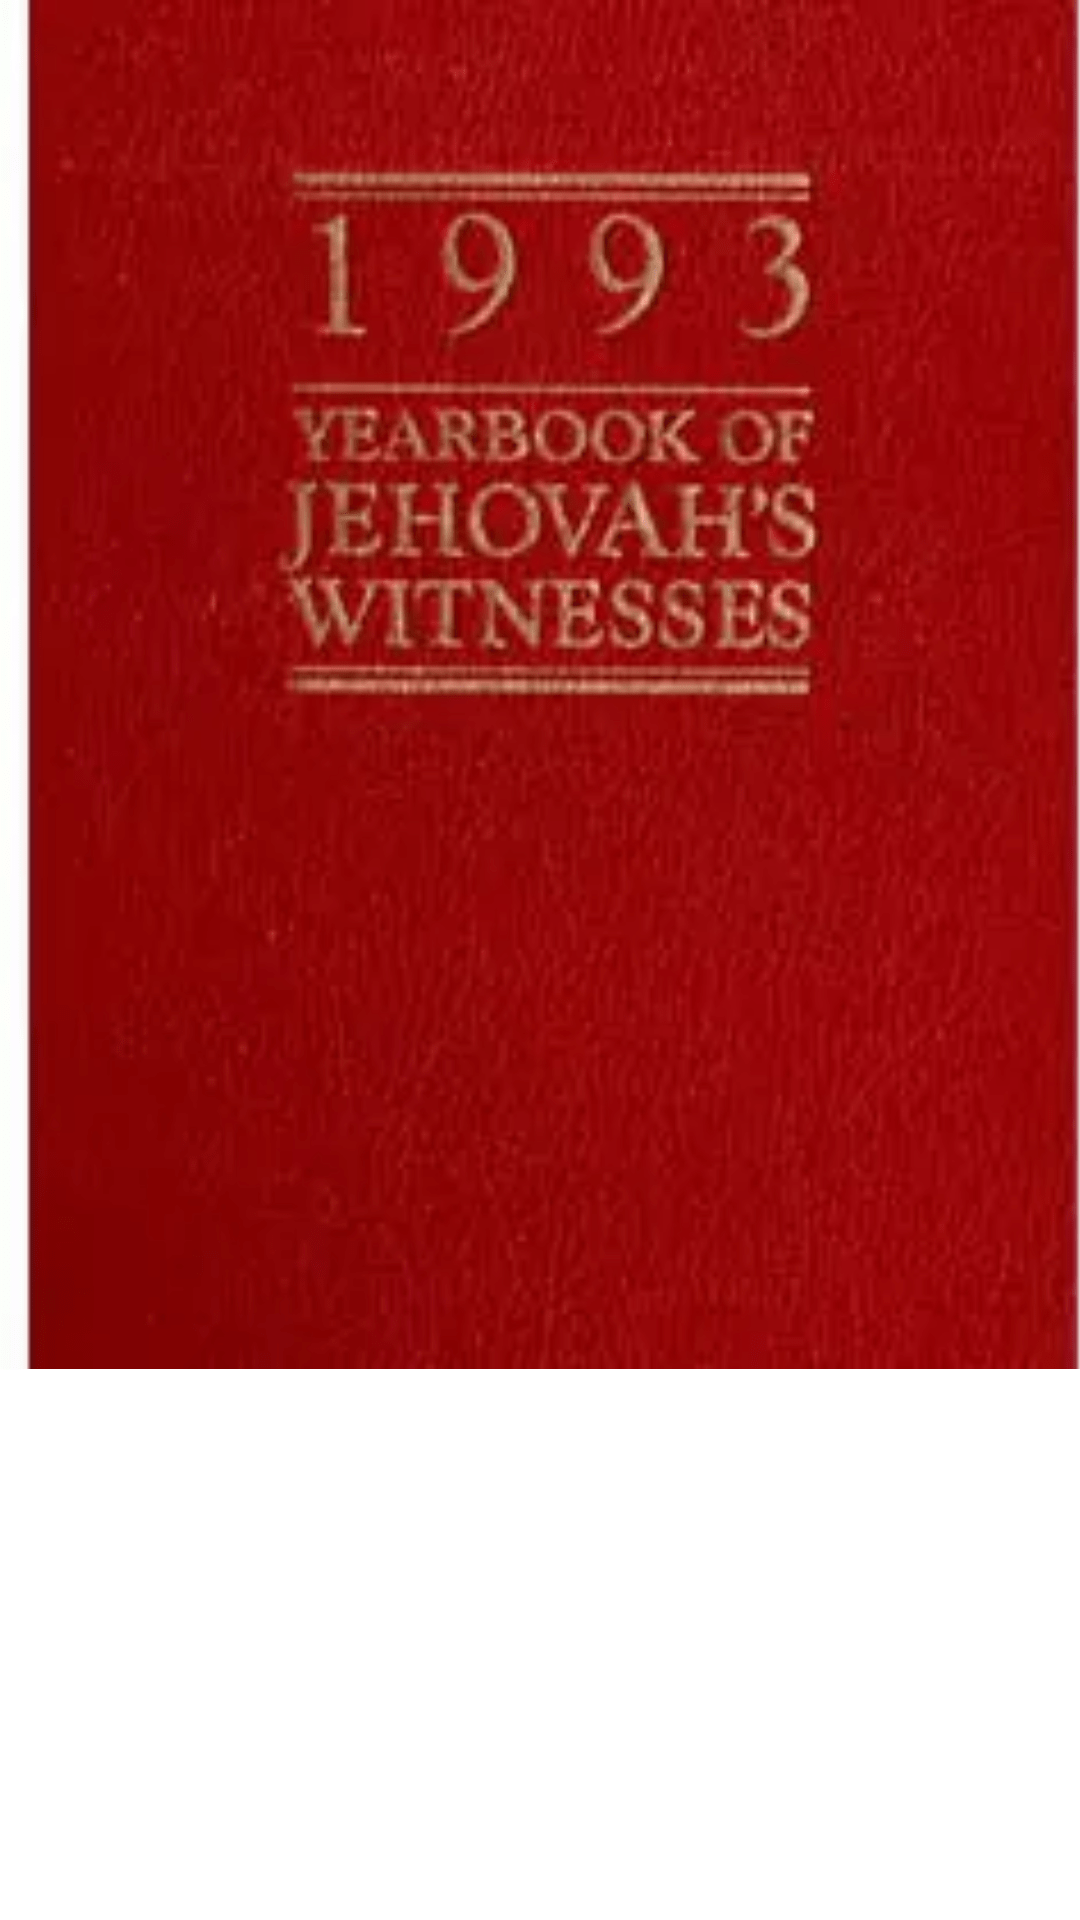 1993 Yearbook of Jehovah's Witnesses